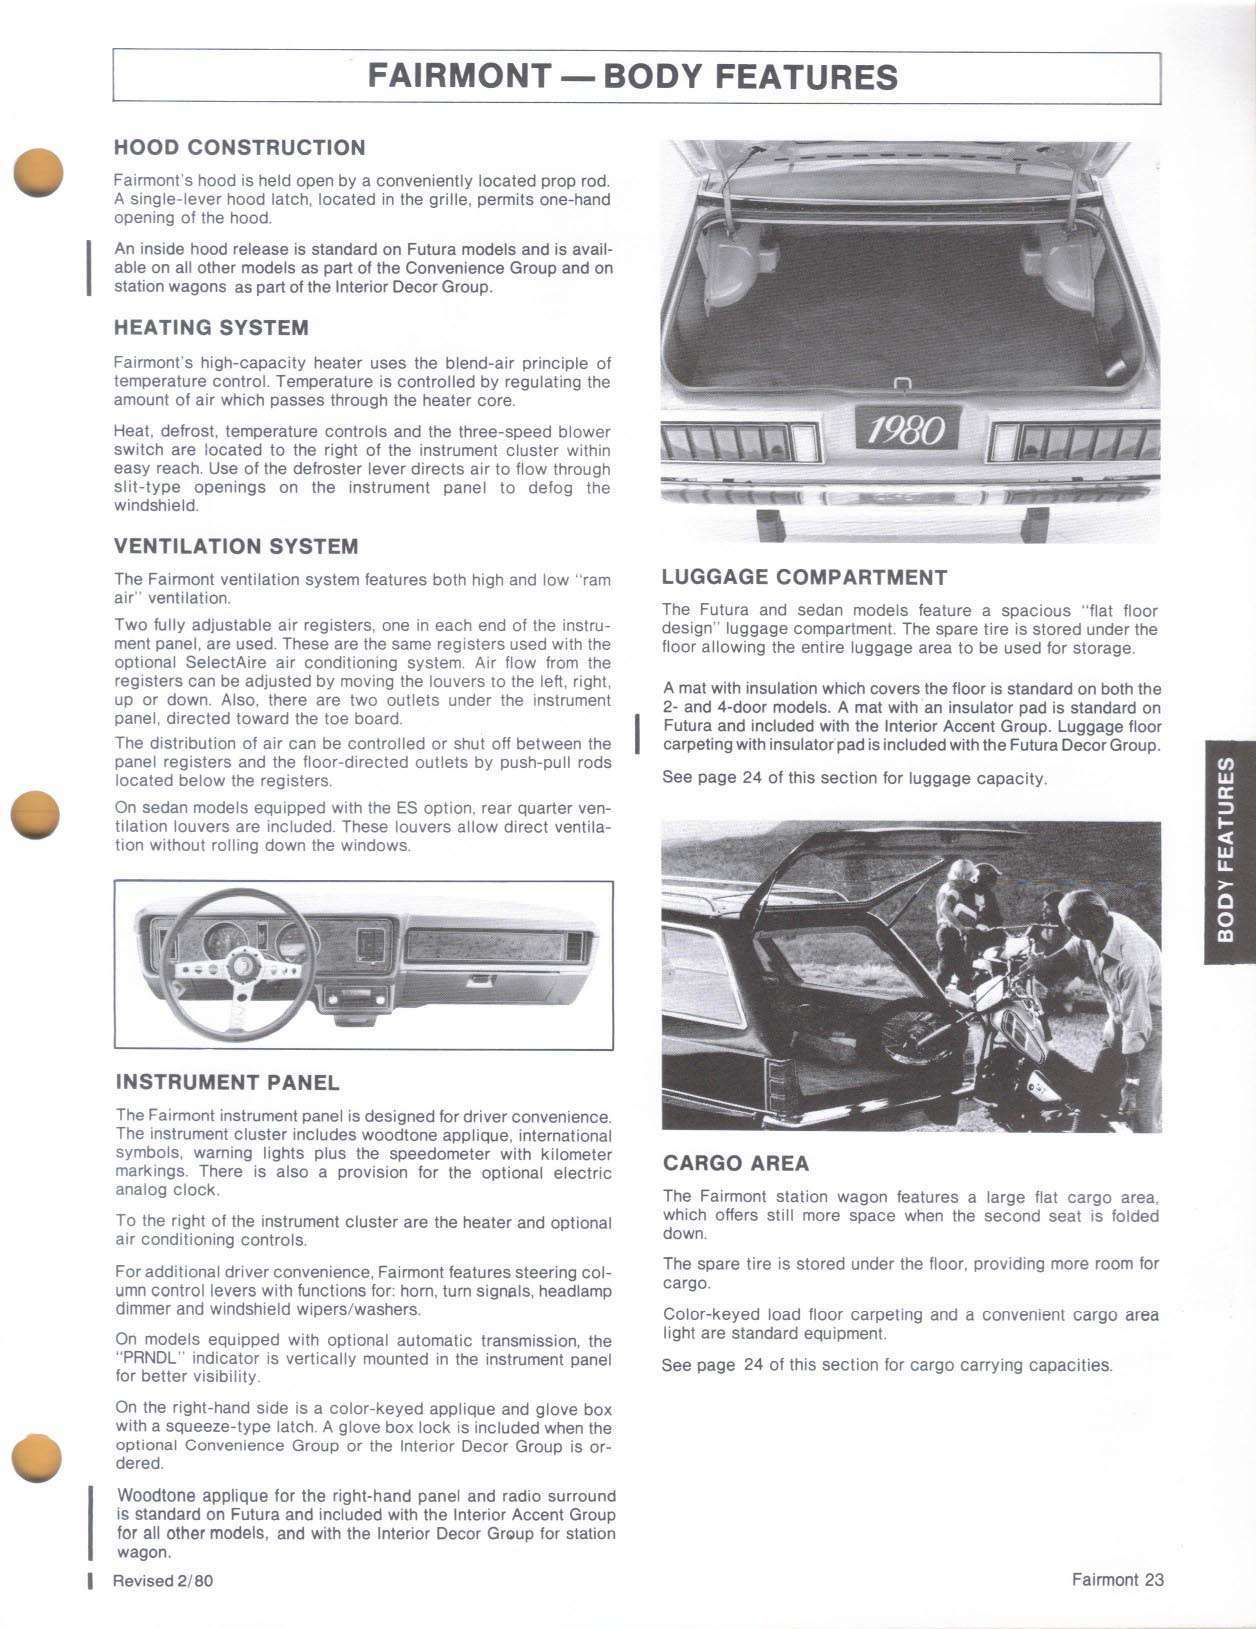 1980_Ford_Fairmont_Car_Facts-23